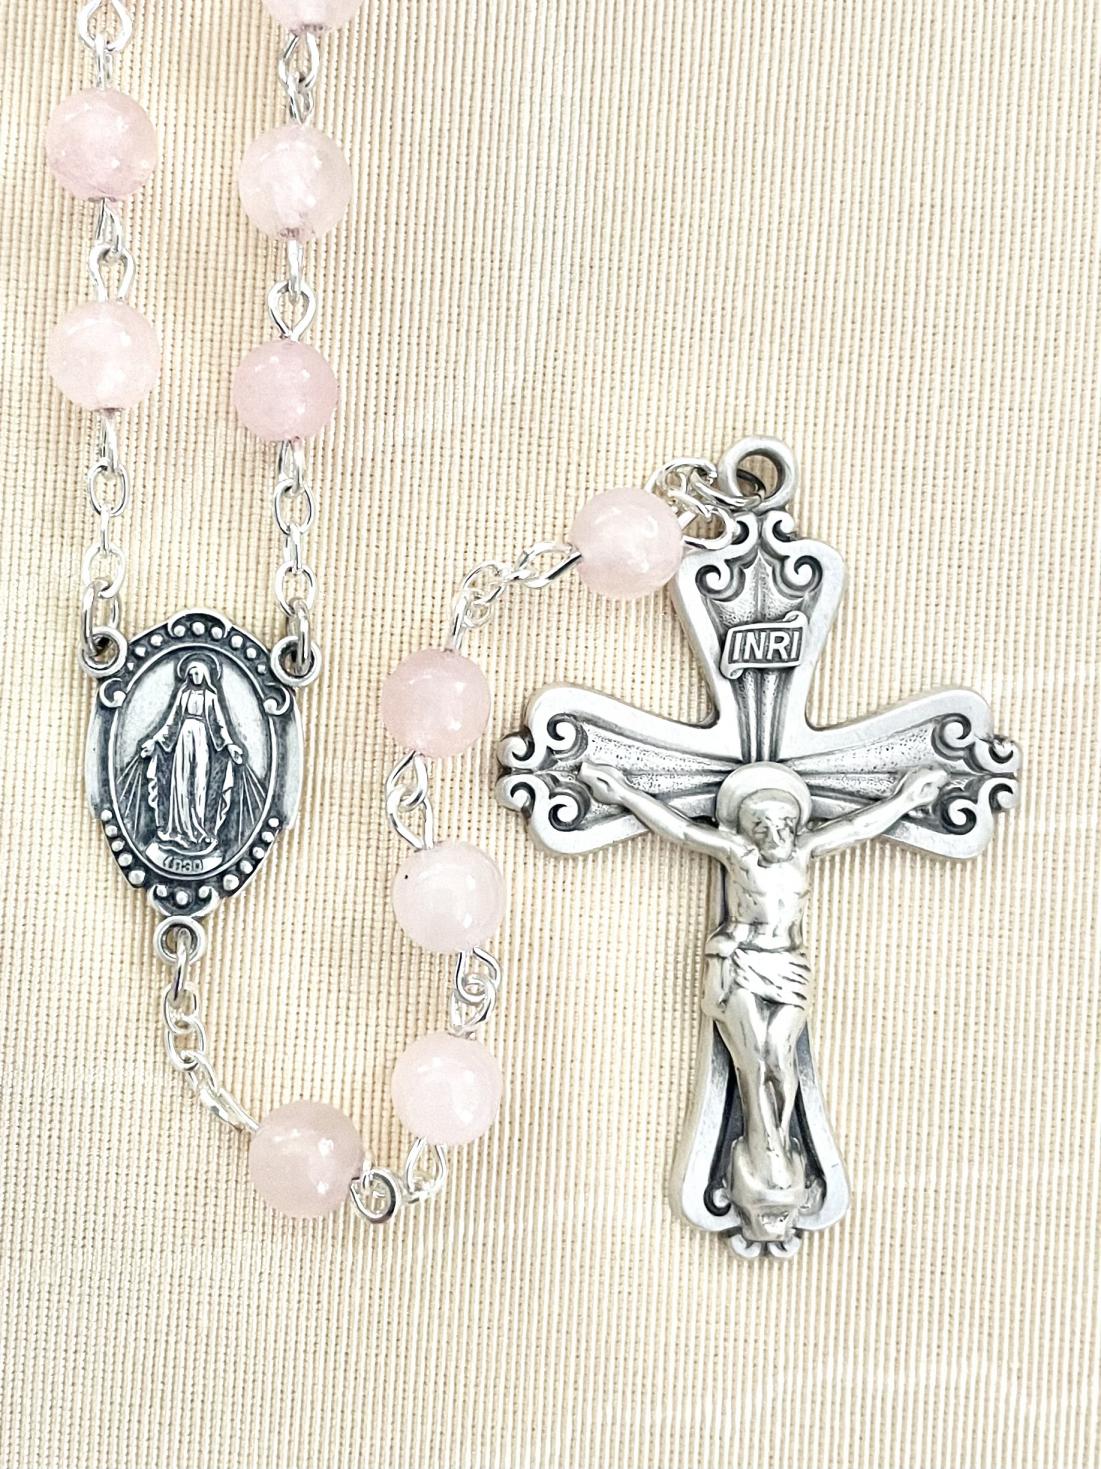 6mm ROSE QUARTZ GEMSTONE ROSARY WITH STRERLING SILVER CRUCIFIX AND CENTER, GIFT BOXED